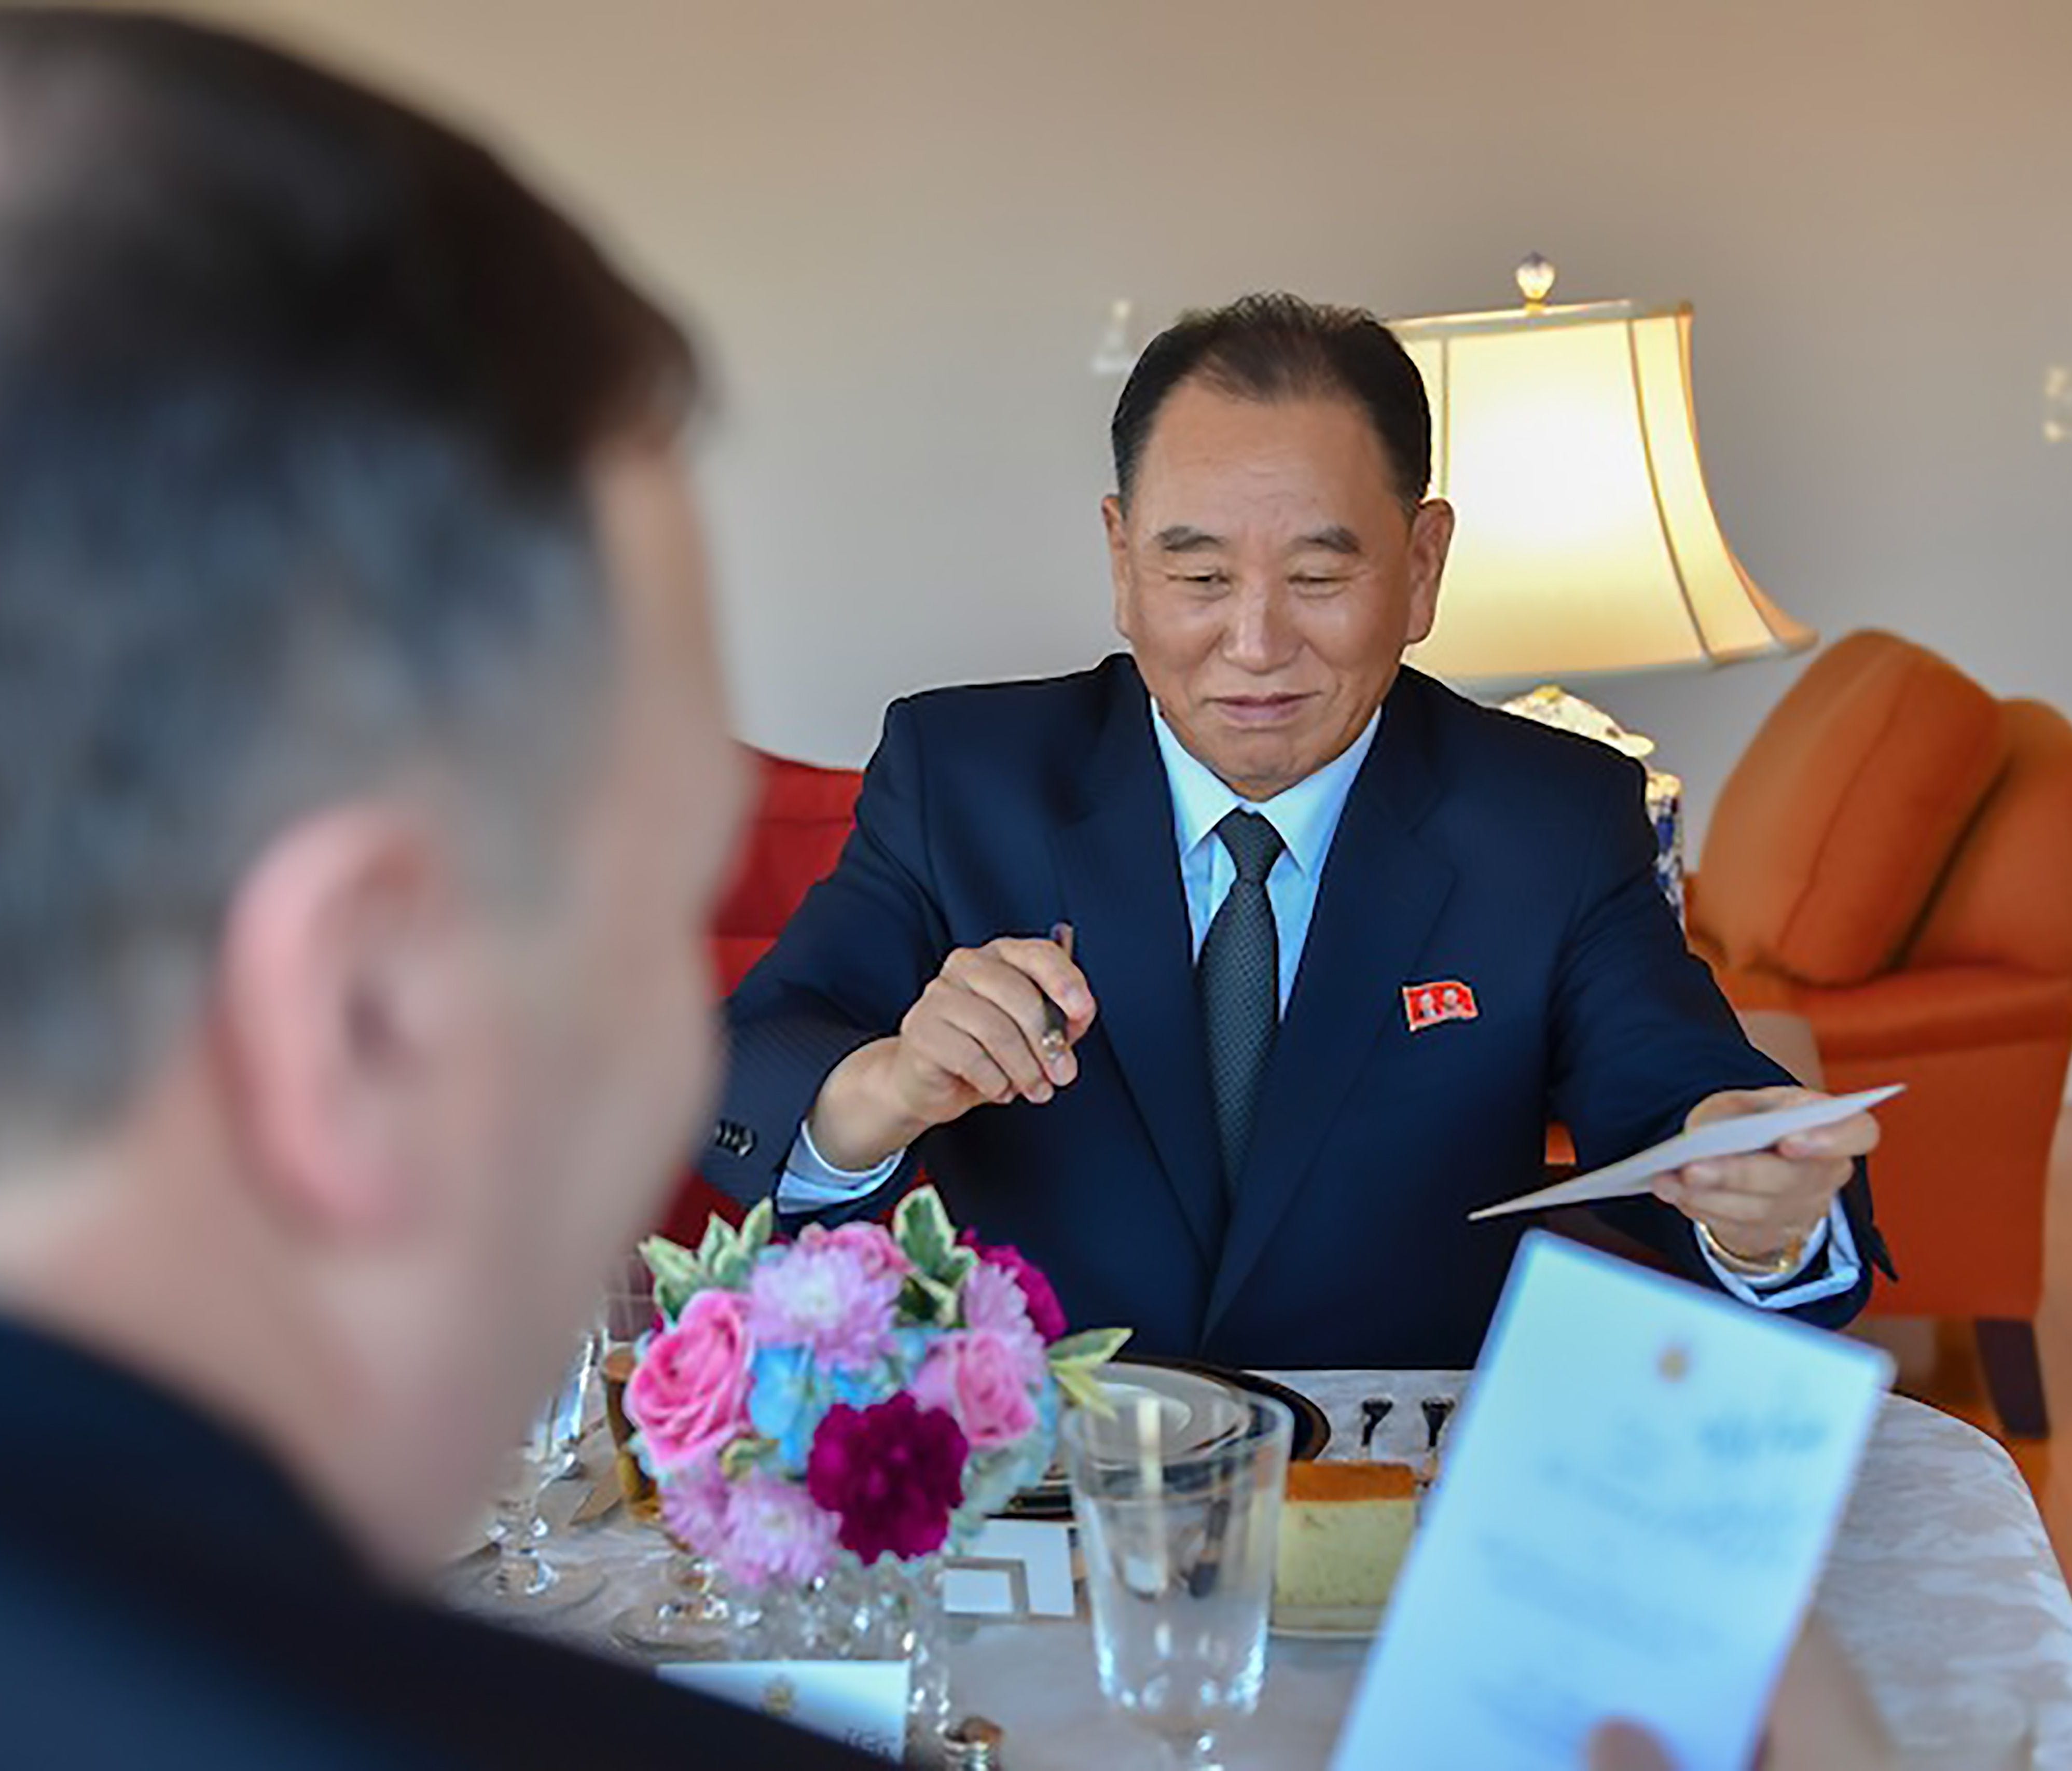 This handout photograph obtained courtesy of the Department of State shows Kim Yong Chol, Vice Chairman of North Korea, during his dinner meeting with Secretary of State Mike Pompeo on May 30, 2018 in New York.